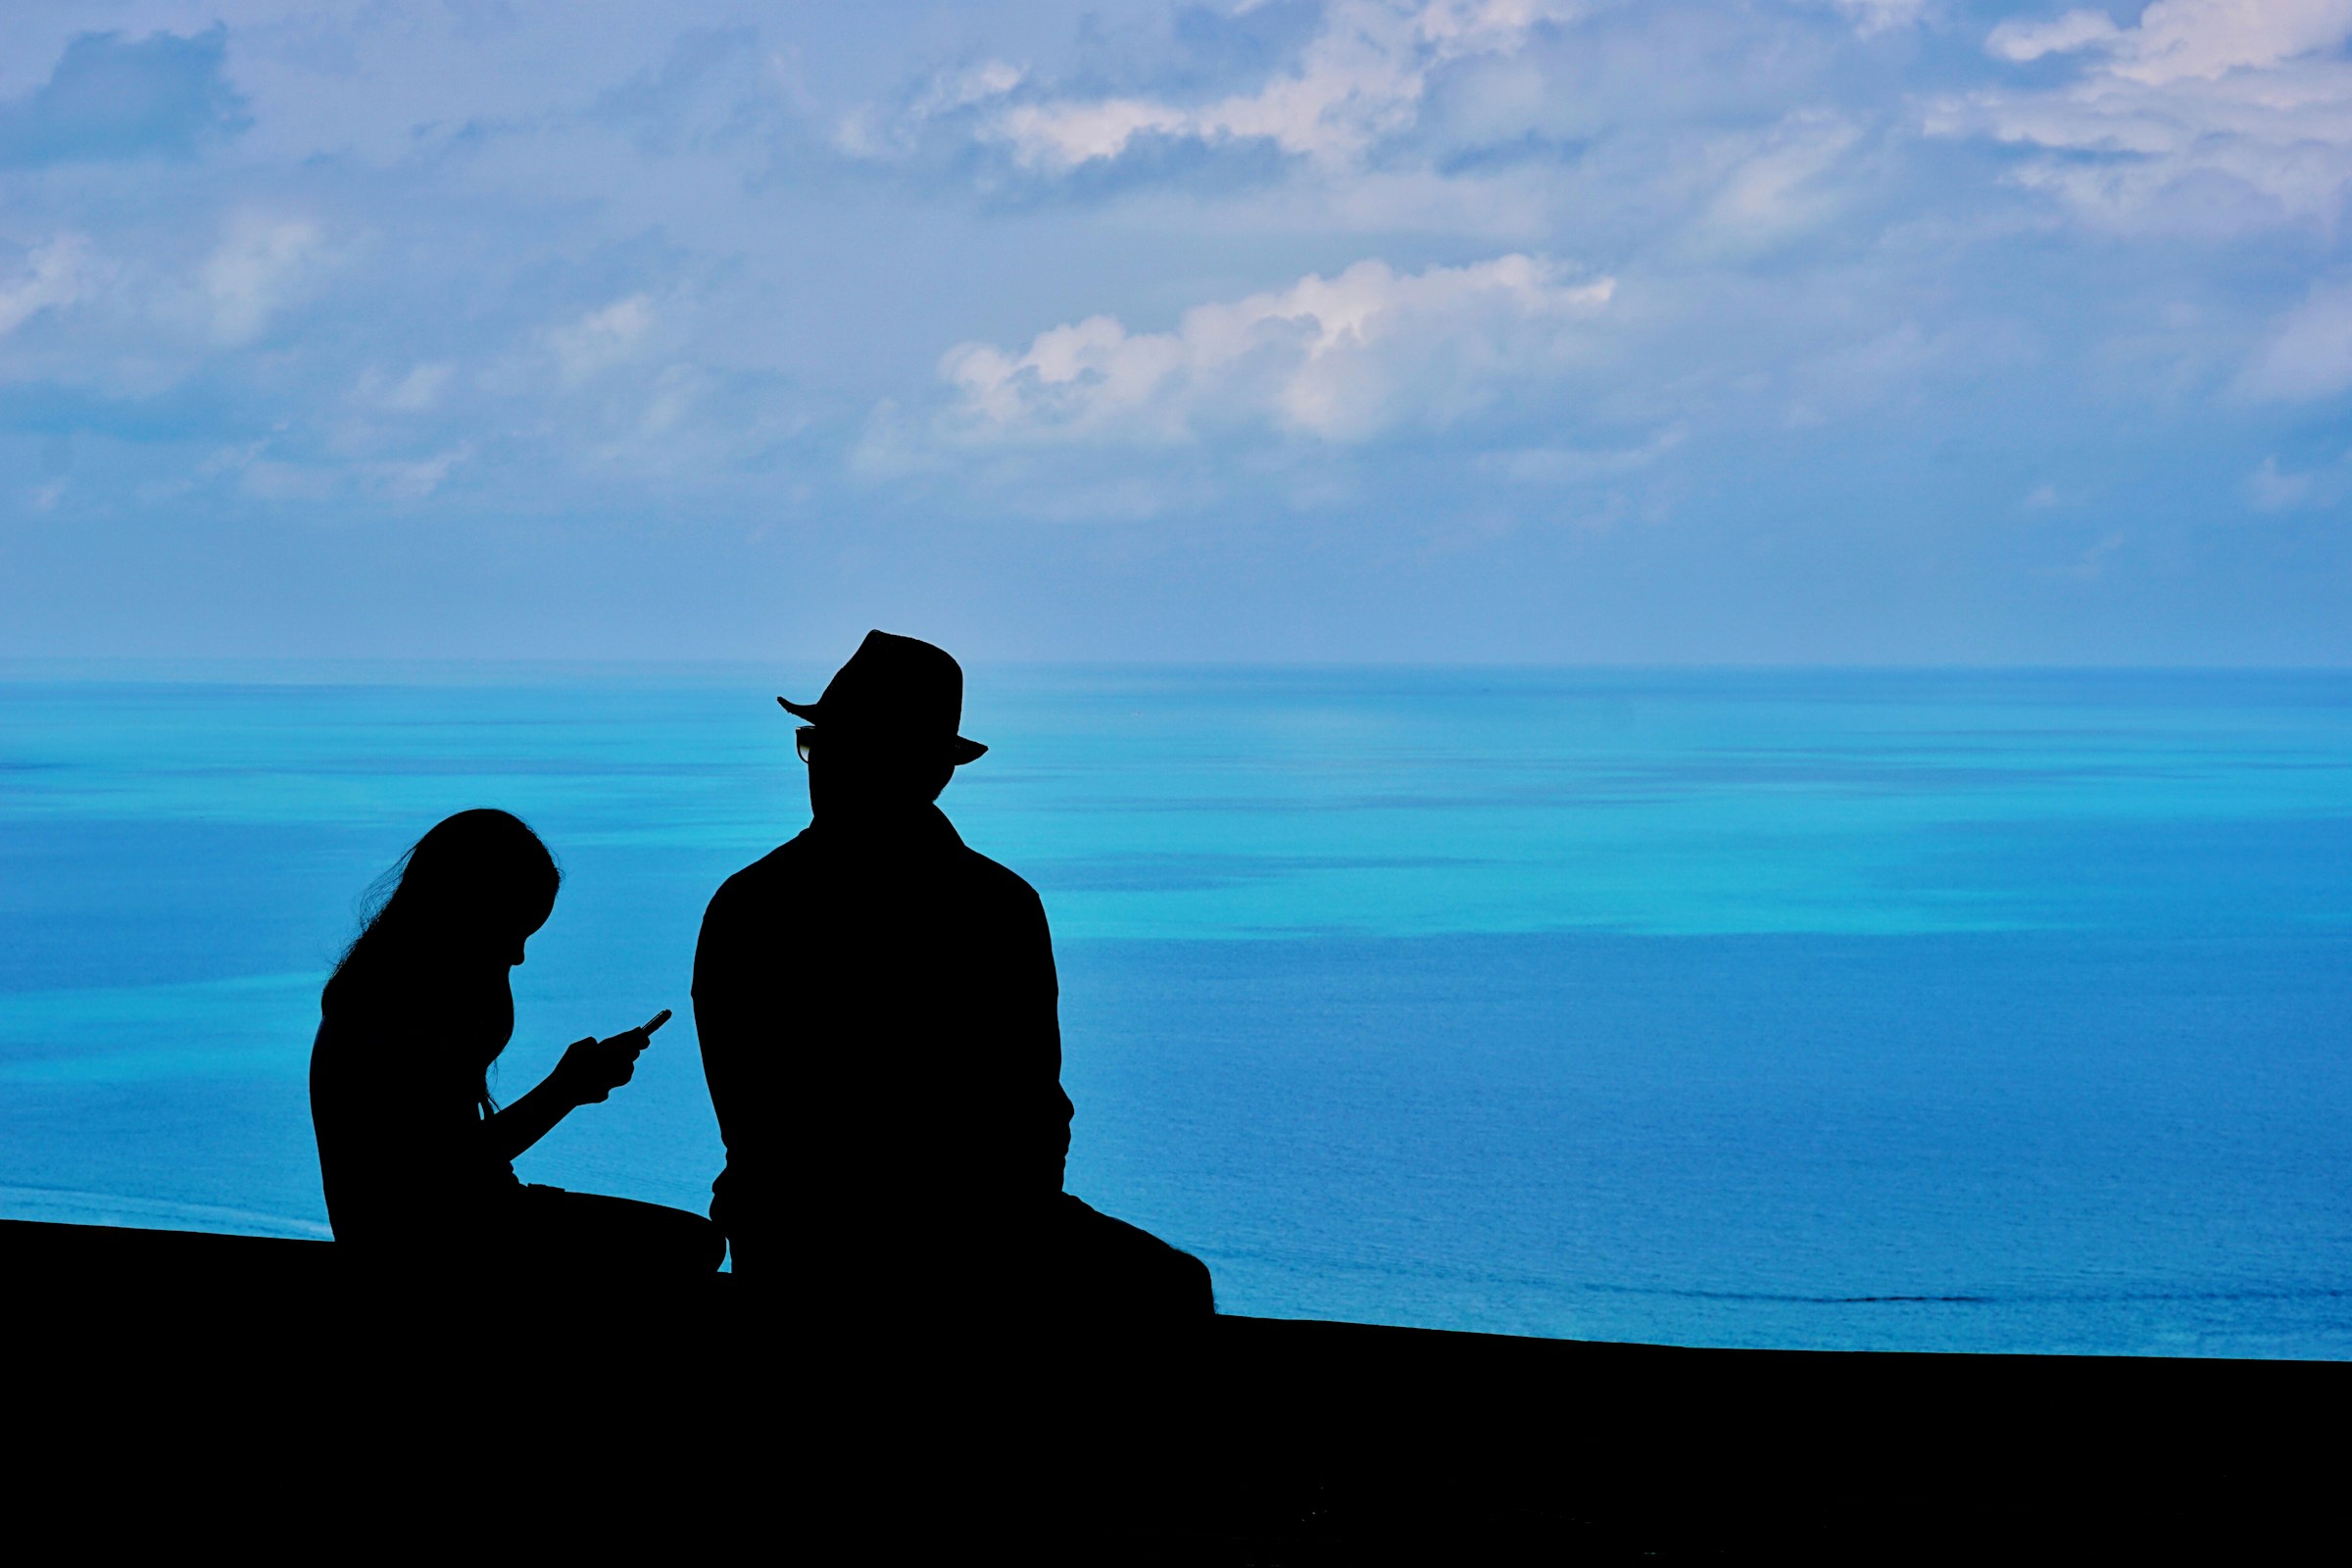 A father and daughter sitting together | Source: Unsplash